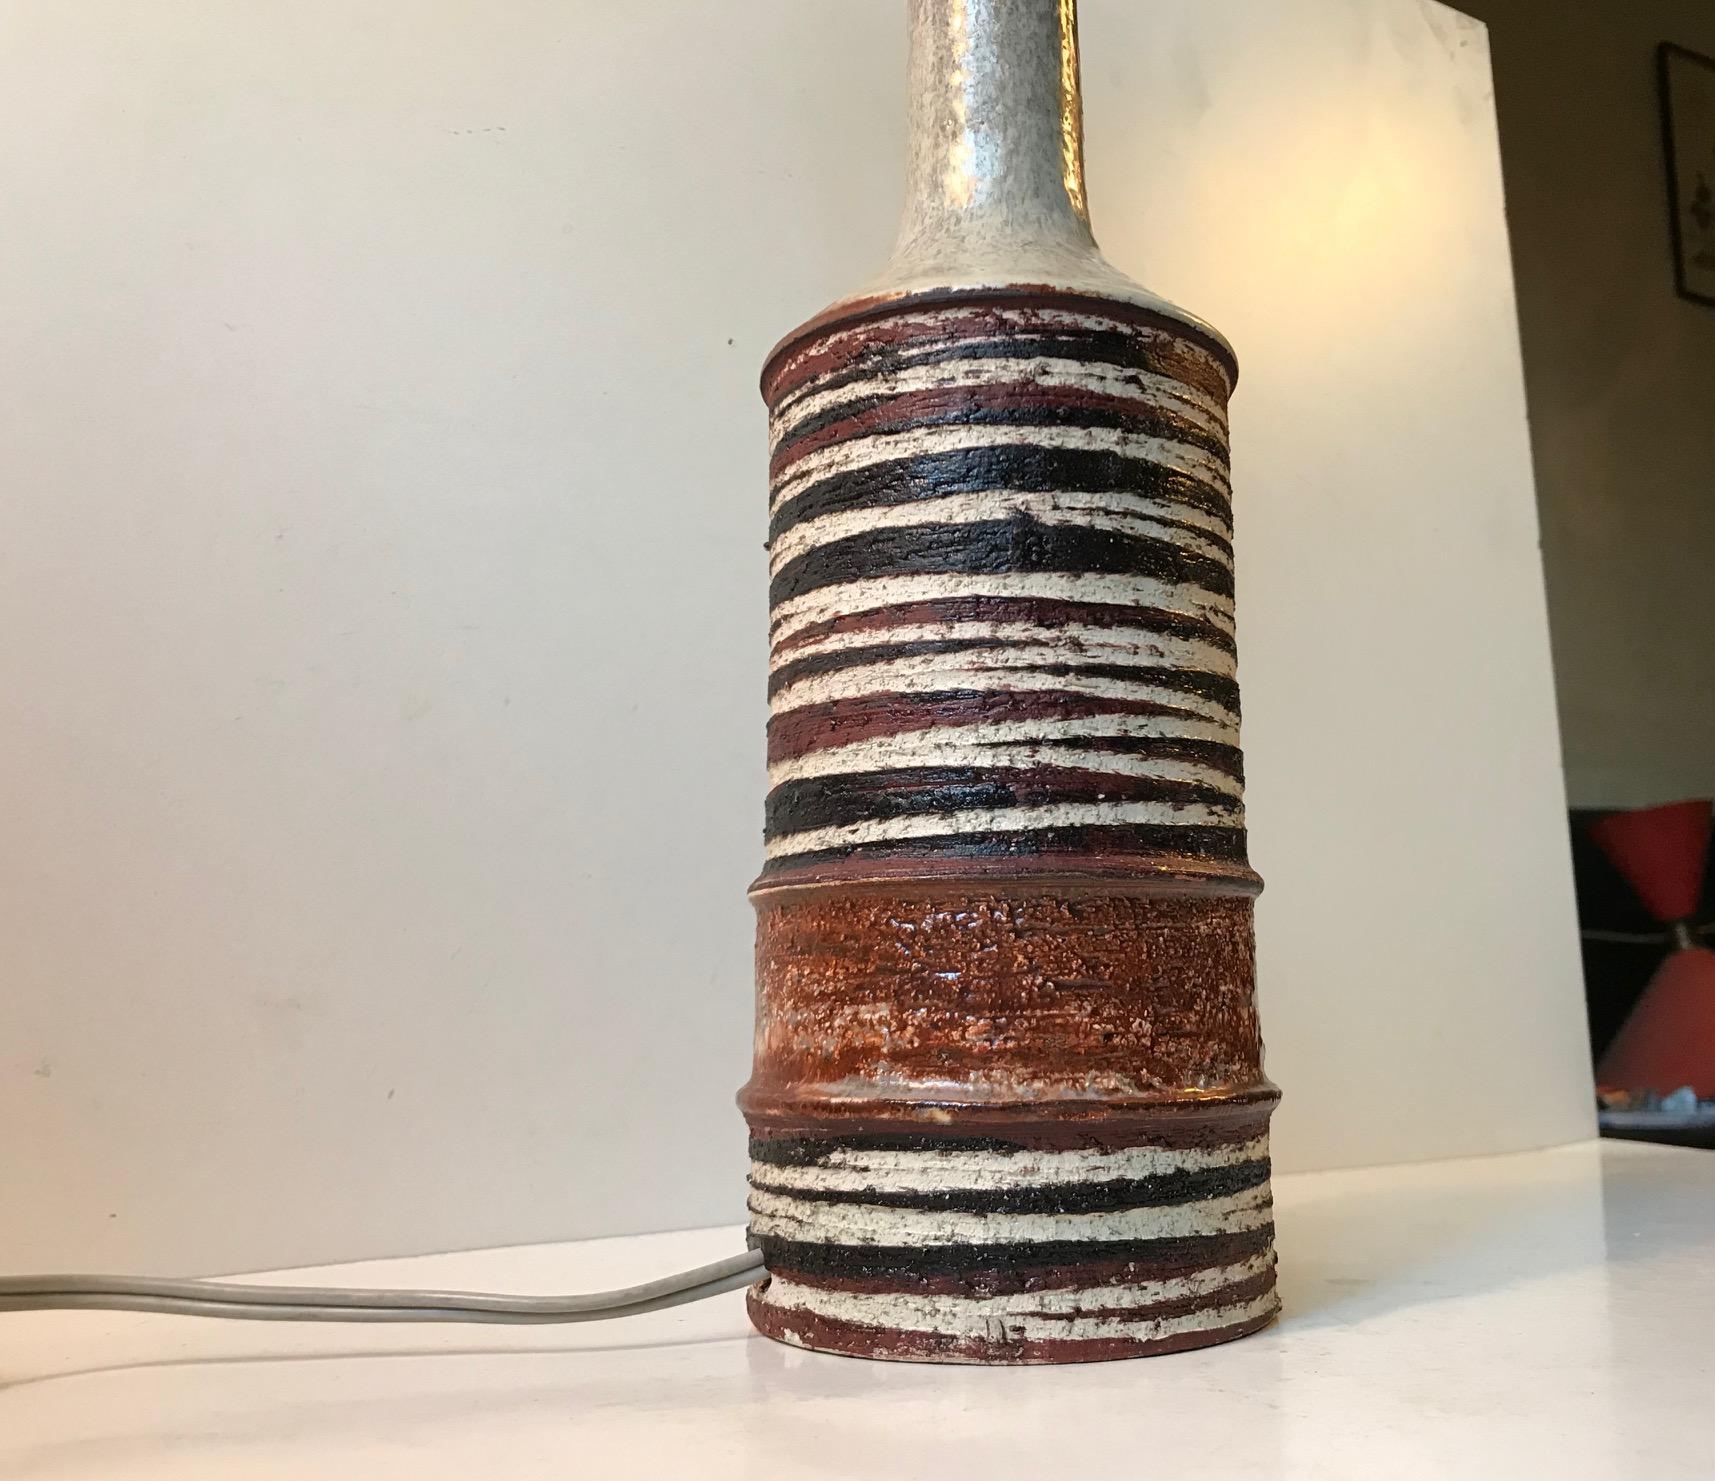 - Stoneware table light decorated with earthy glazes in a striped Tribal motif
- Designed by Jette Hellerøe and manufactured by Axella and Nordisk Solar
- Made in Denmark during the 1970s
- Inscribed by the maker and designer to the base
- Sold